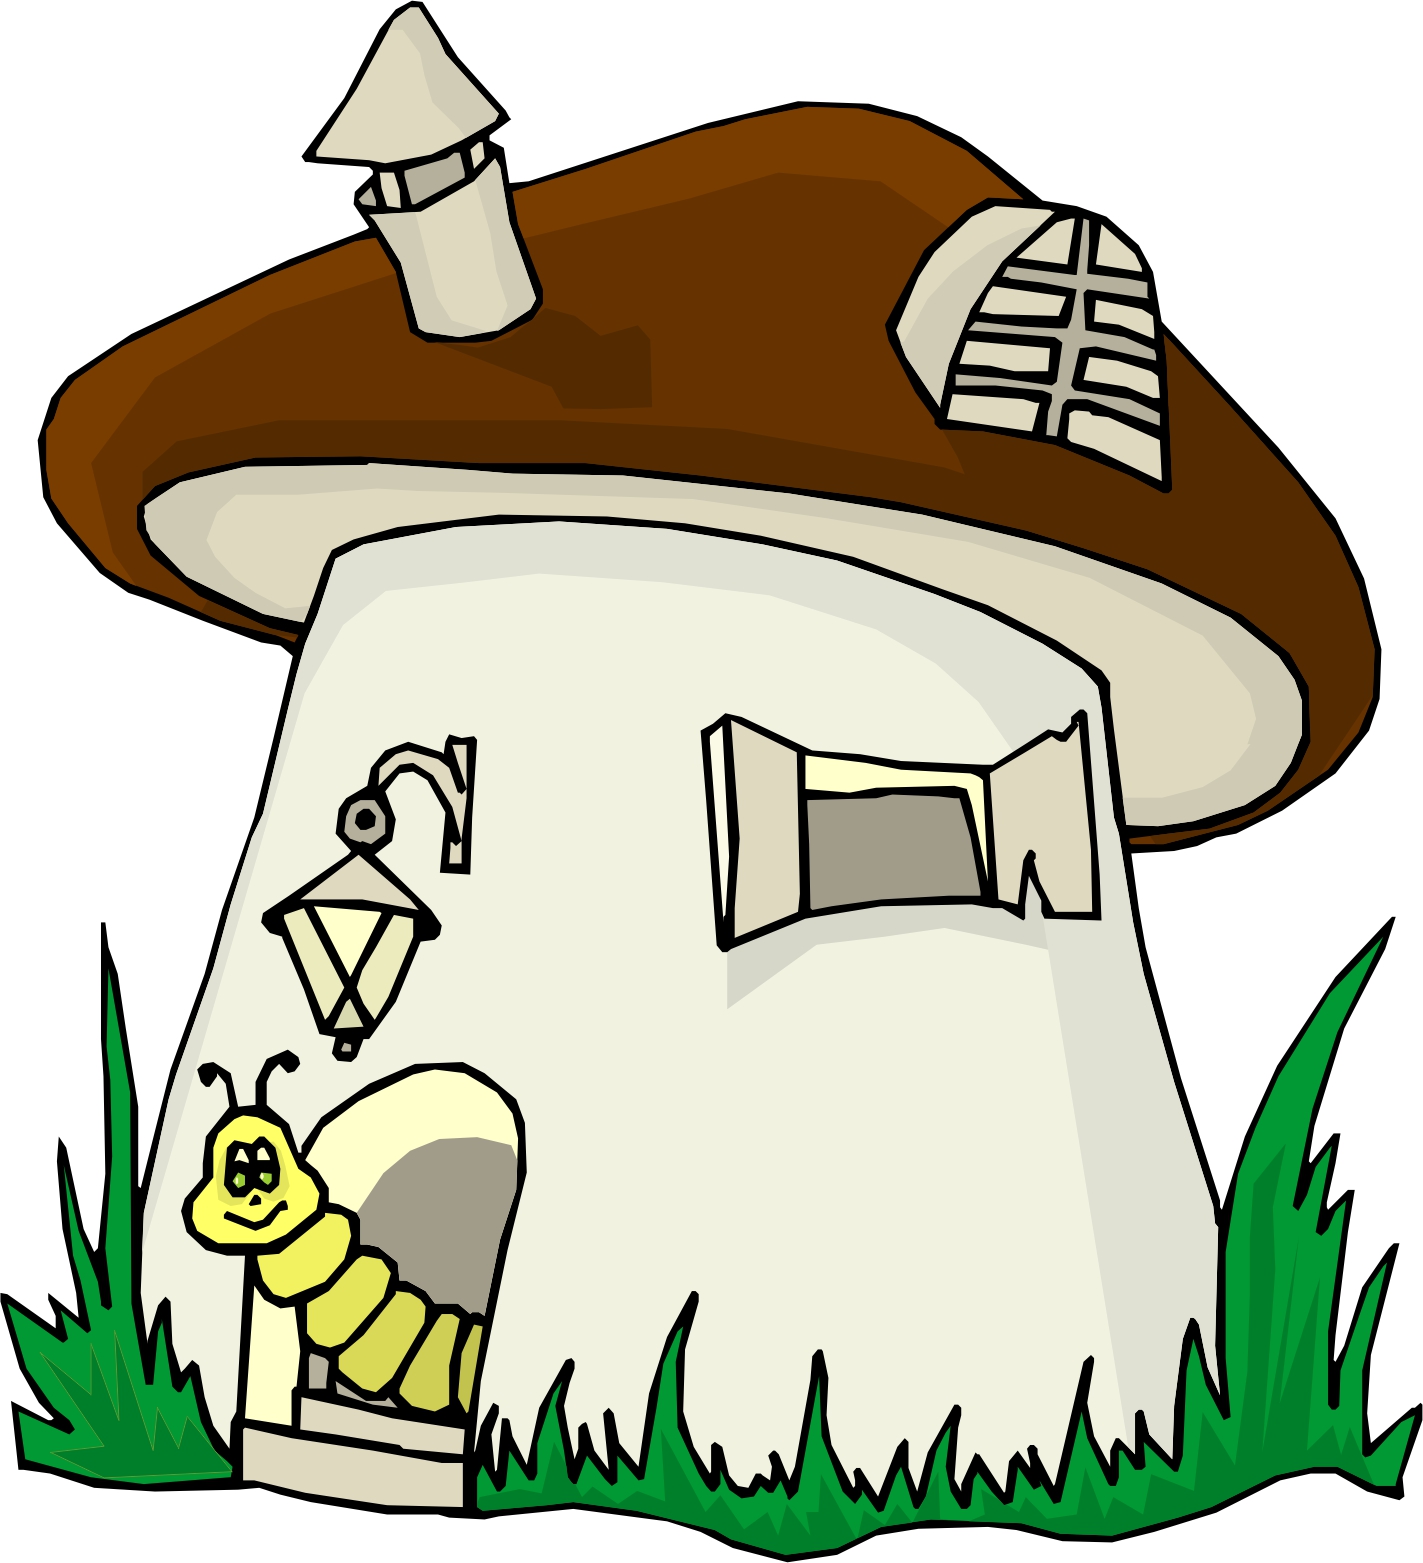 Cartoon Pictures Of A House - ClipArt Best